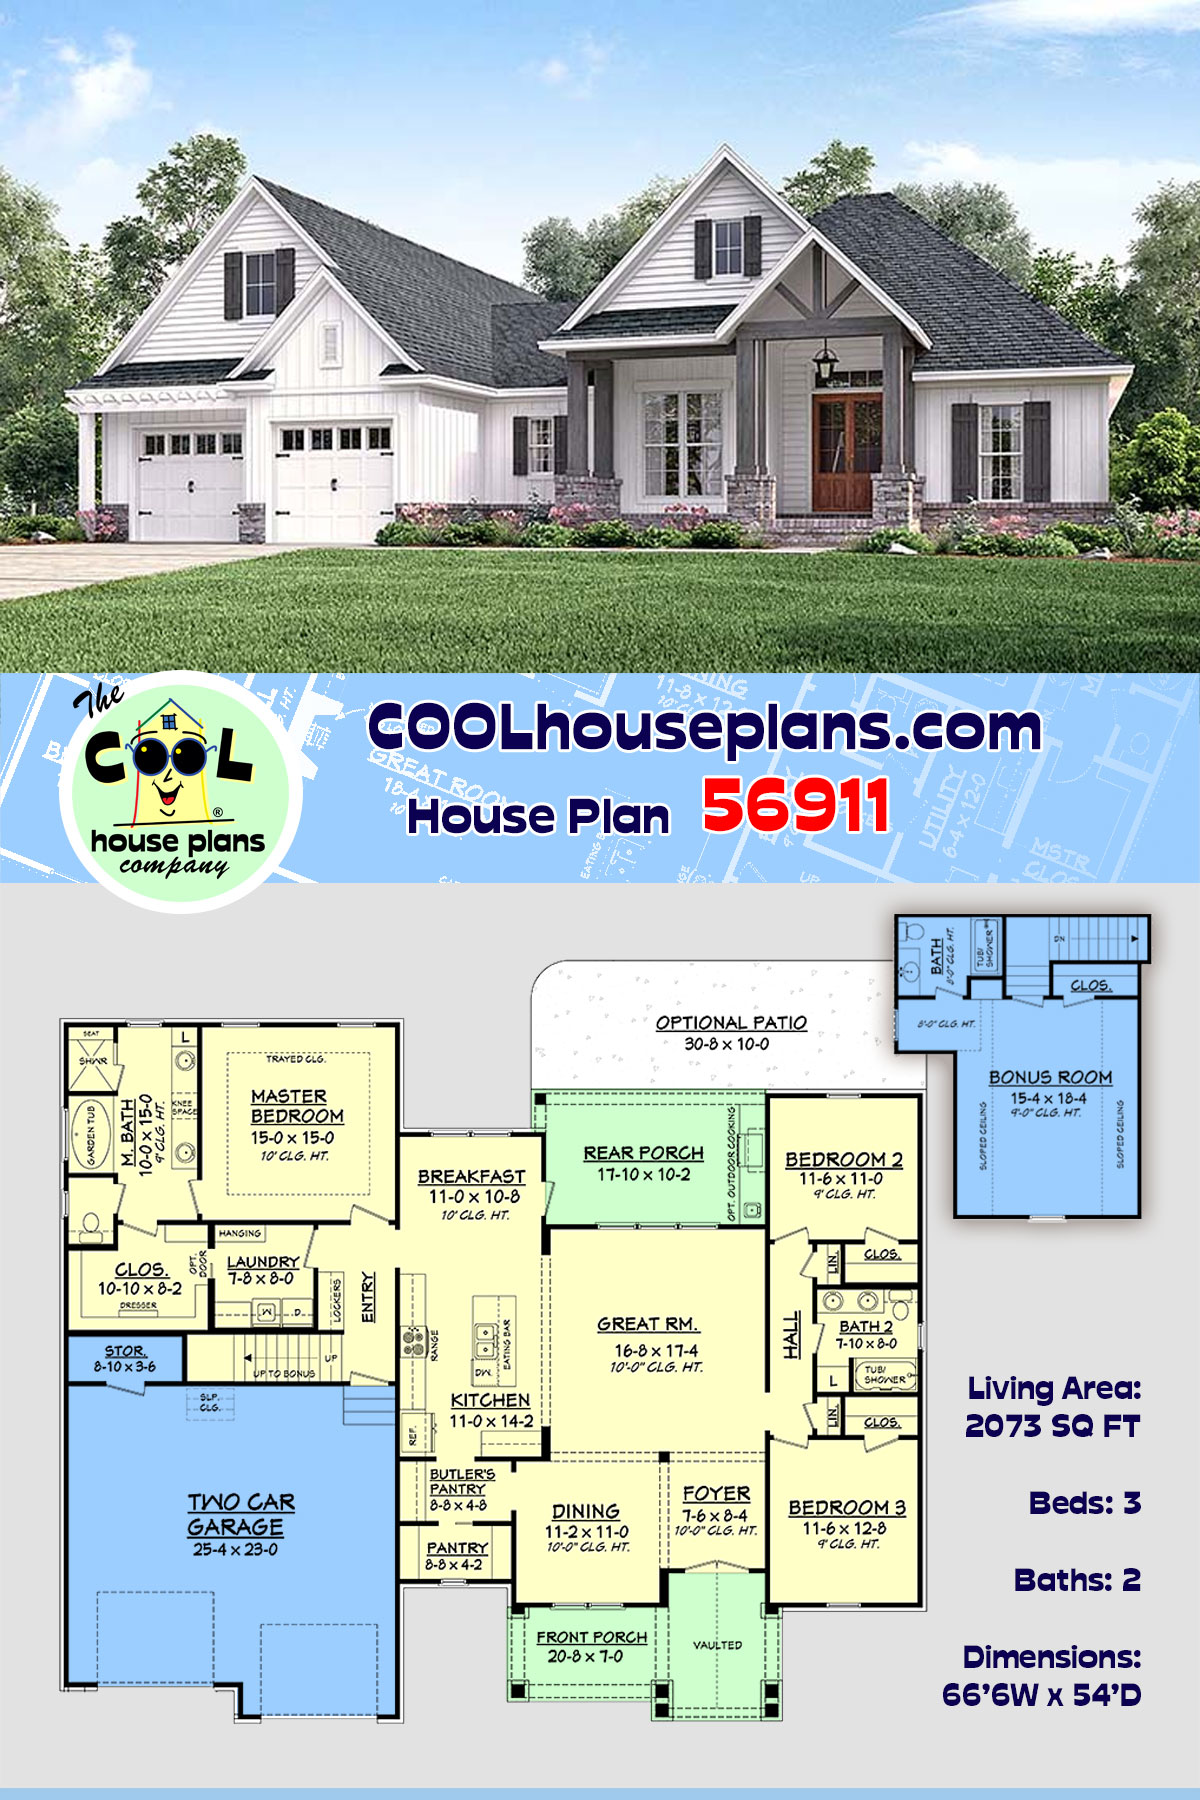 House Plan 56911 - Traditional Style with 2073 Sq Ft, 3 Bed, 2 Ba